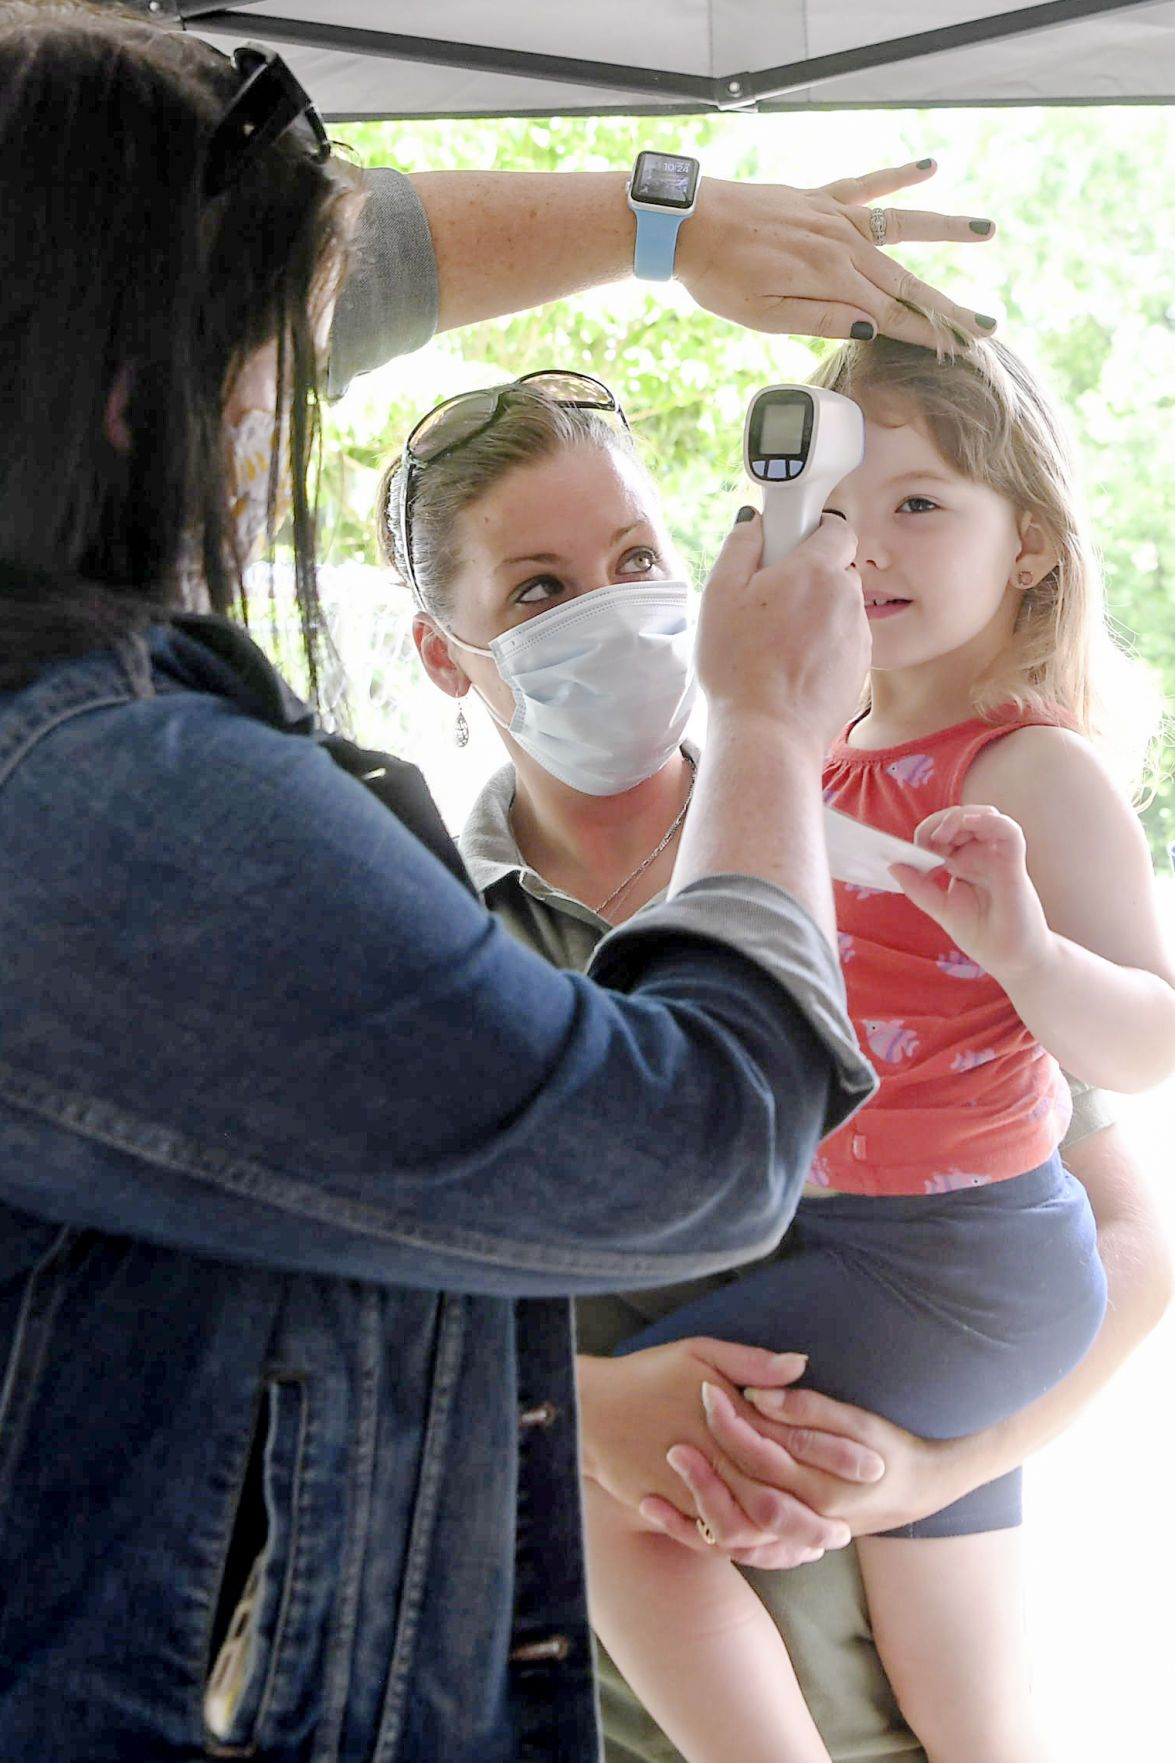 CANDLER, NORTH CAROLINA - Amy Waddell holds her daughter, Aliza, 3, as her temperature is checked before spending the day at Montmorenci United Methodist Church's daycare June 23, 2020. Image by Angela Wilhelm/Asheville Citizen Times/ North Carolina News Collaborative. United States, 2020.